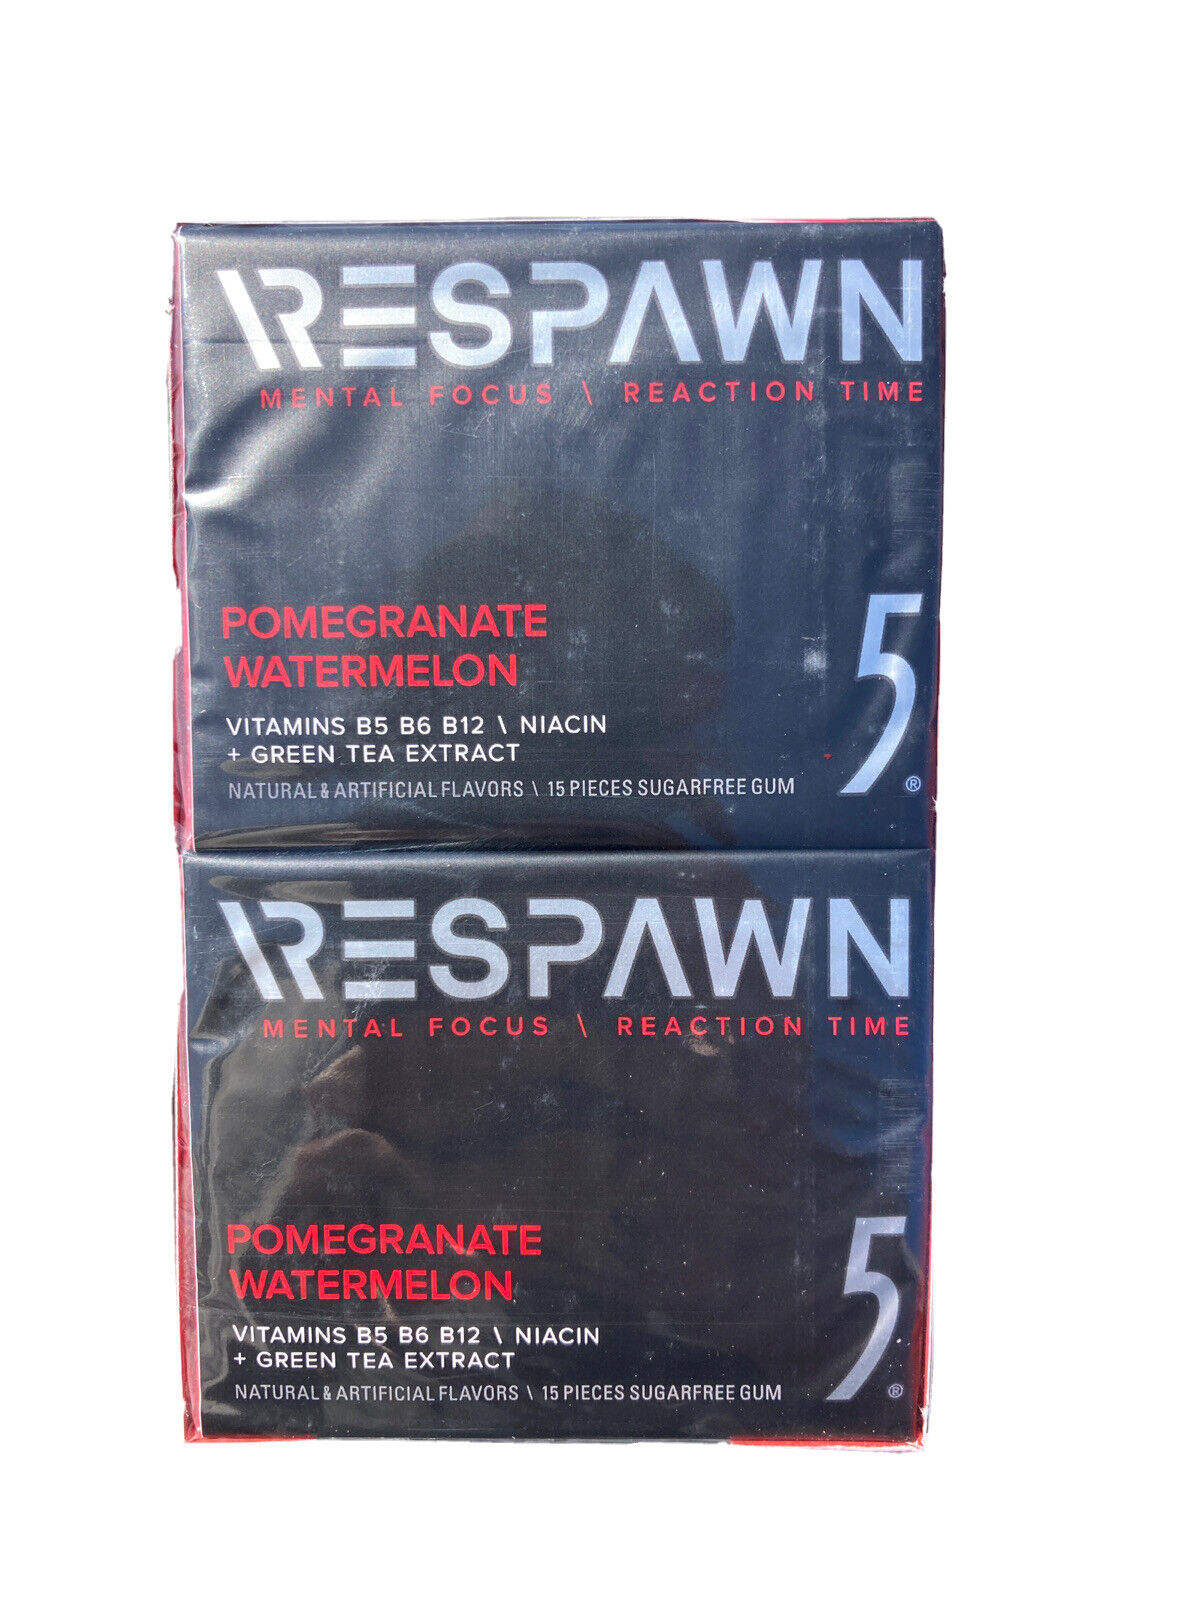 Respawn 5 Gum Watermelon Pomegranate Sealed Box 10 Pack Discontinued Collectible